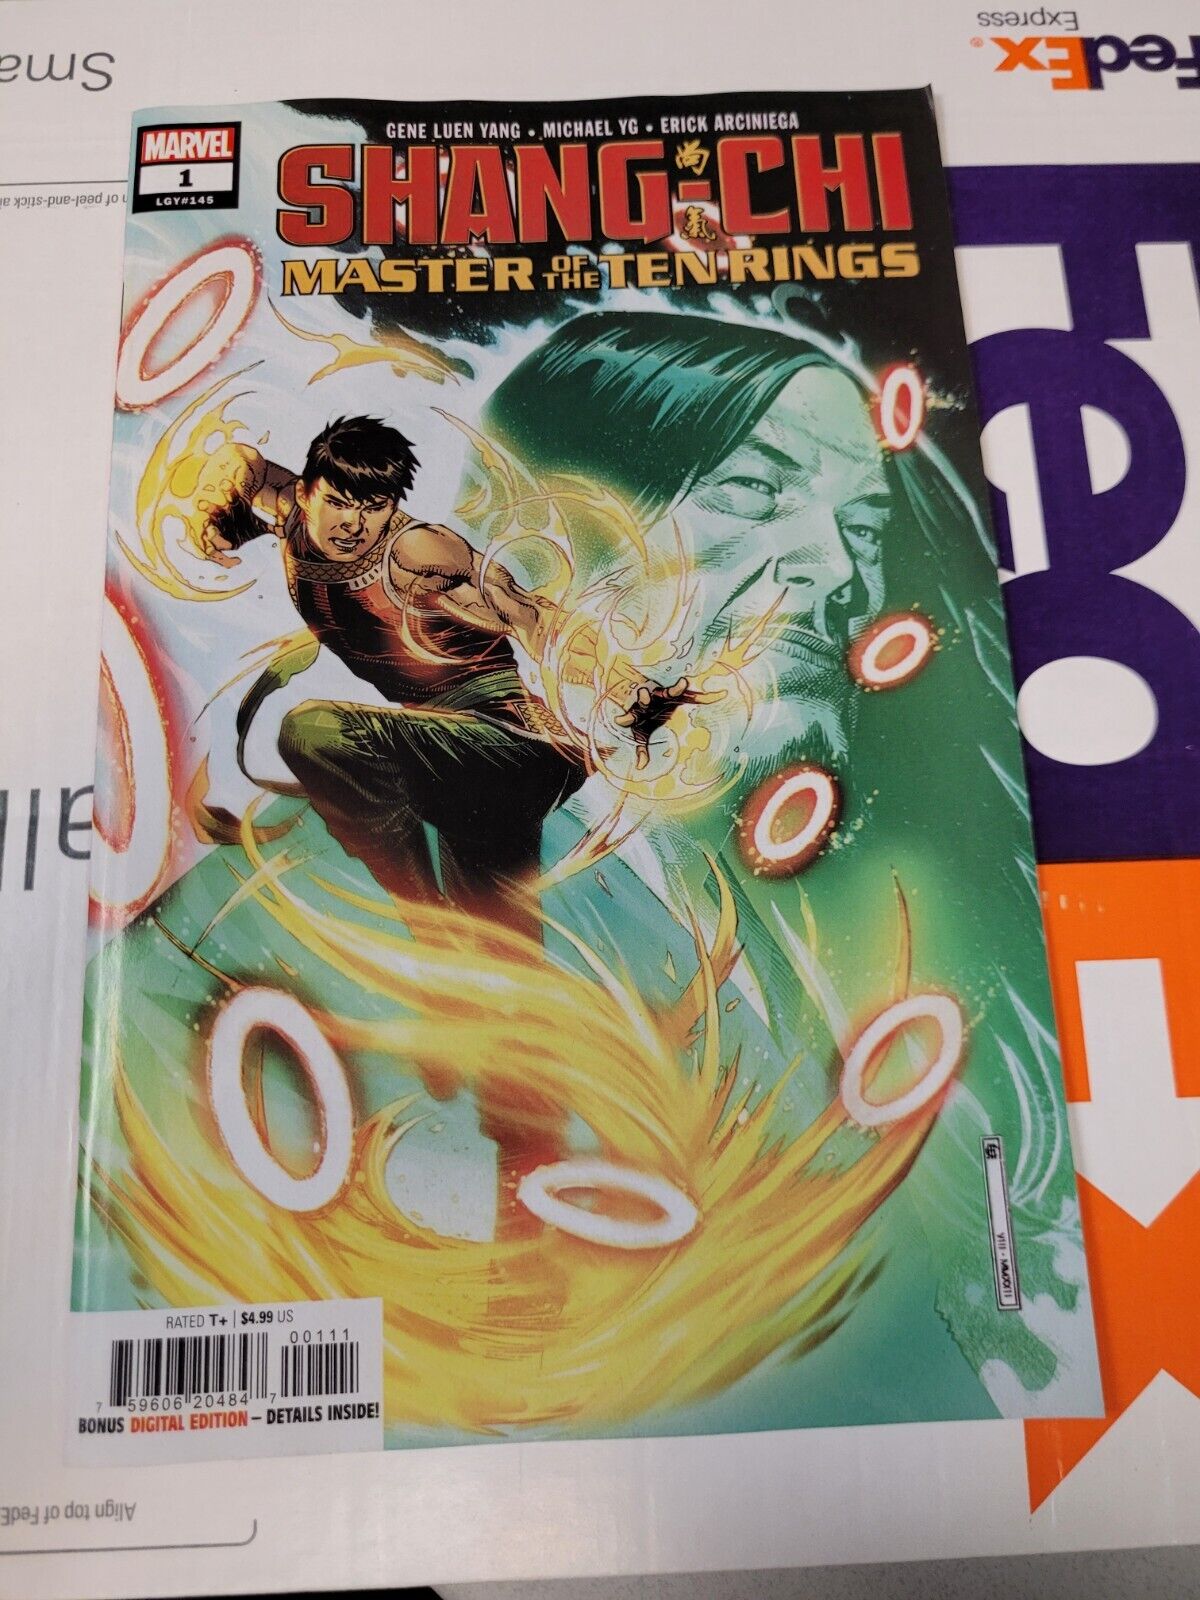 SHANG-CHI MASTER OF THE TEN RINGS #1 NM- OR BETTER 